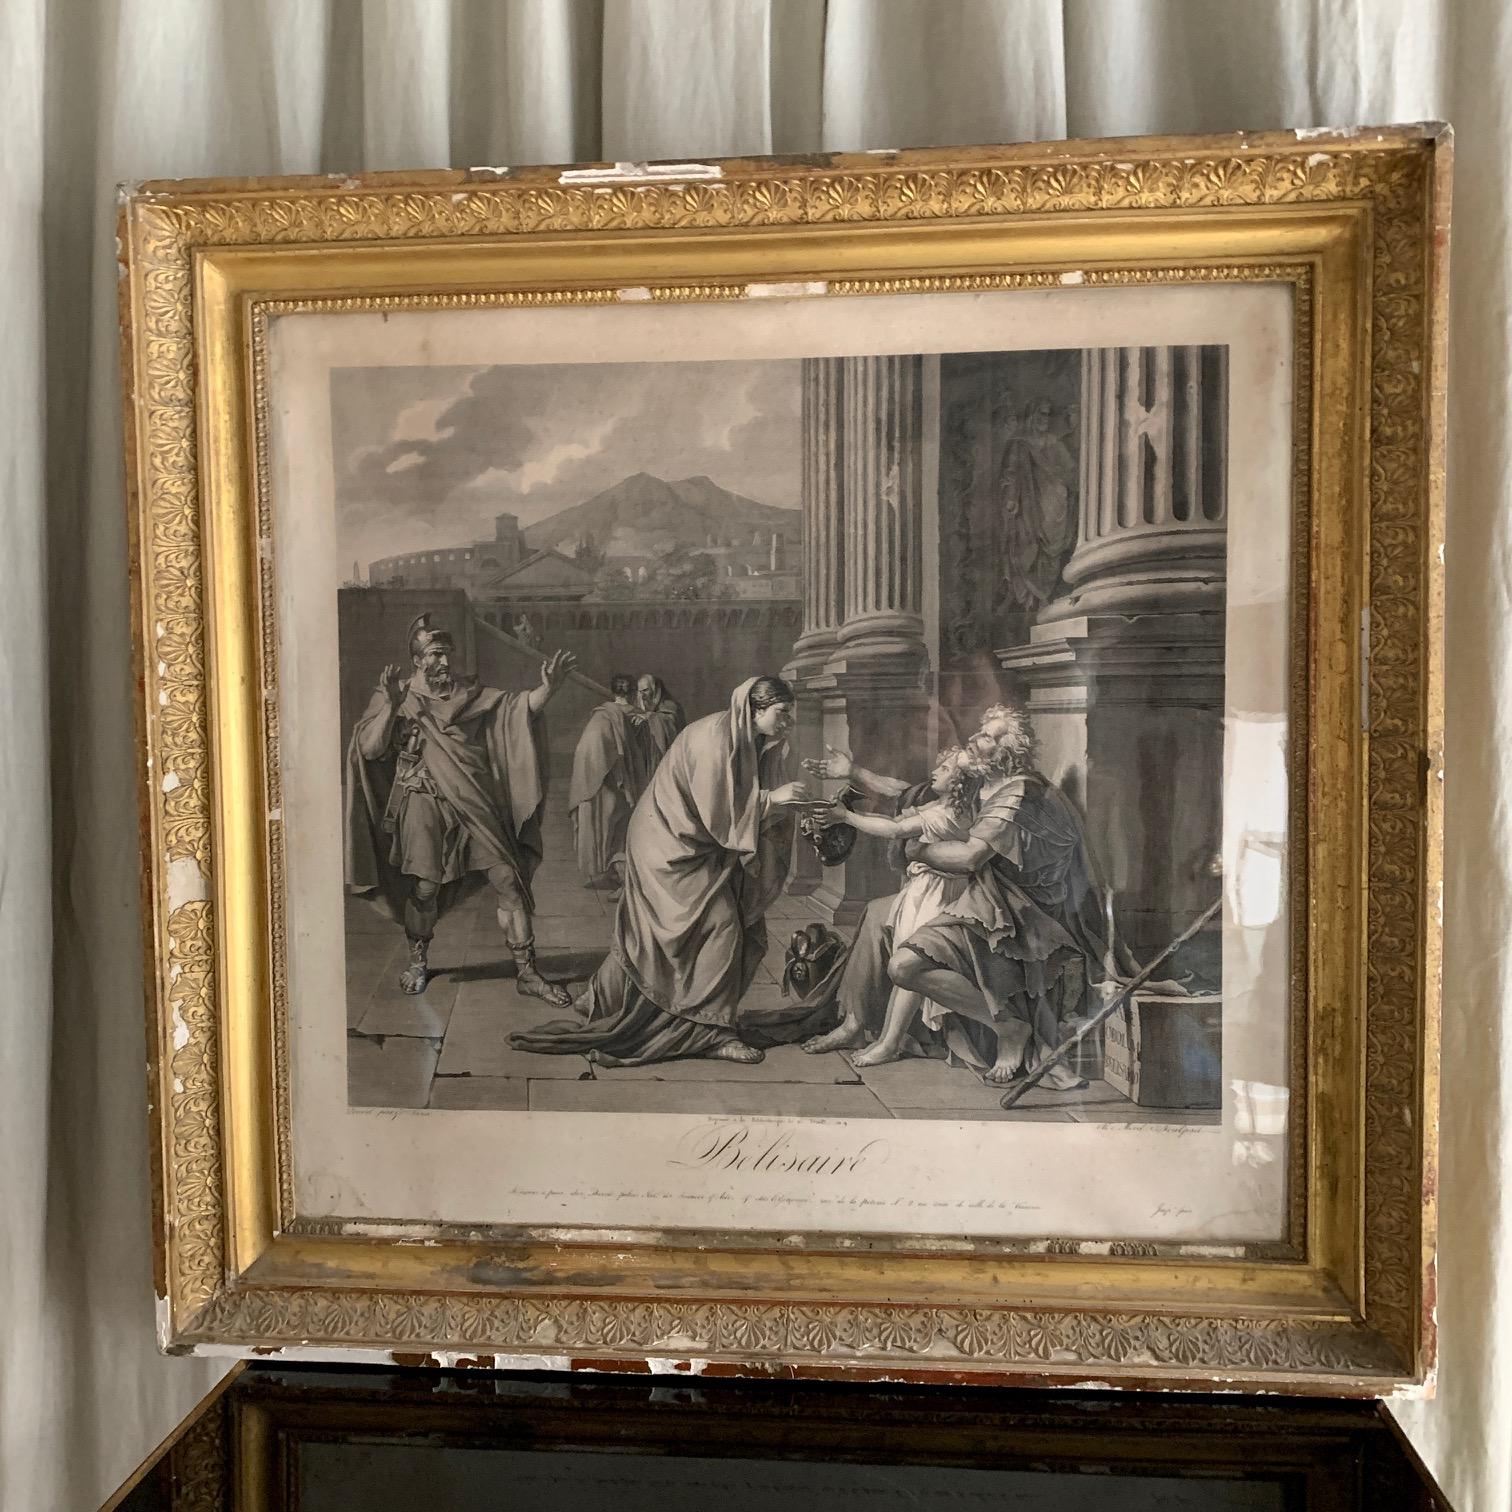 A large early 19th century Empire period engraving. depicting Belisarius receiving Almas, original ilded frame in classical taste, with original glass.